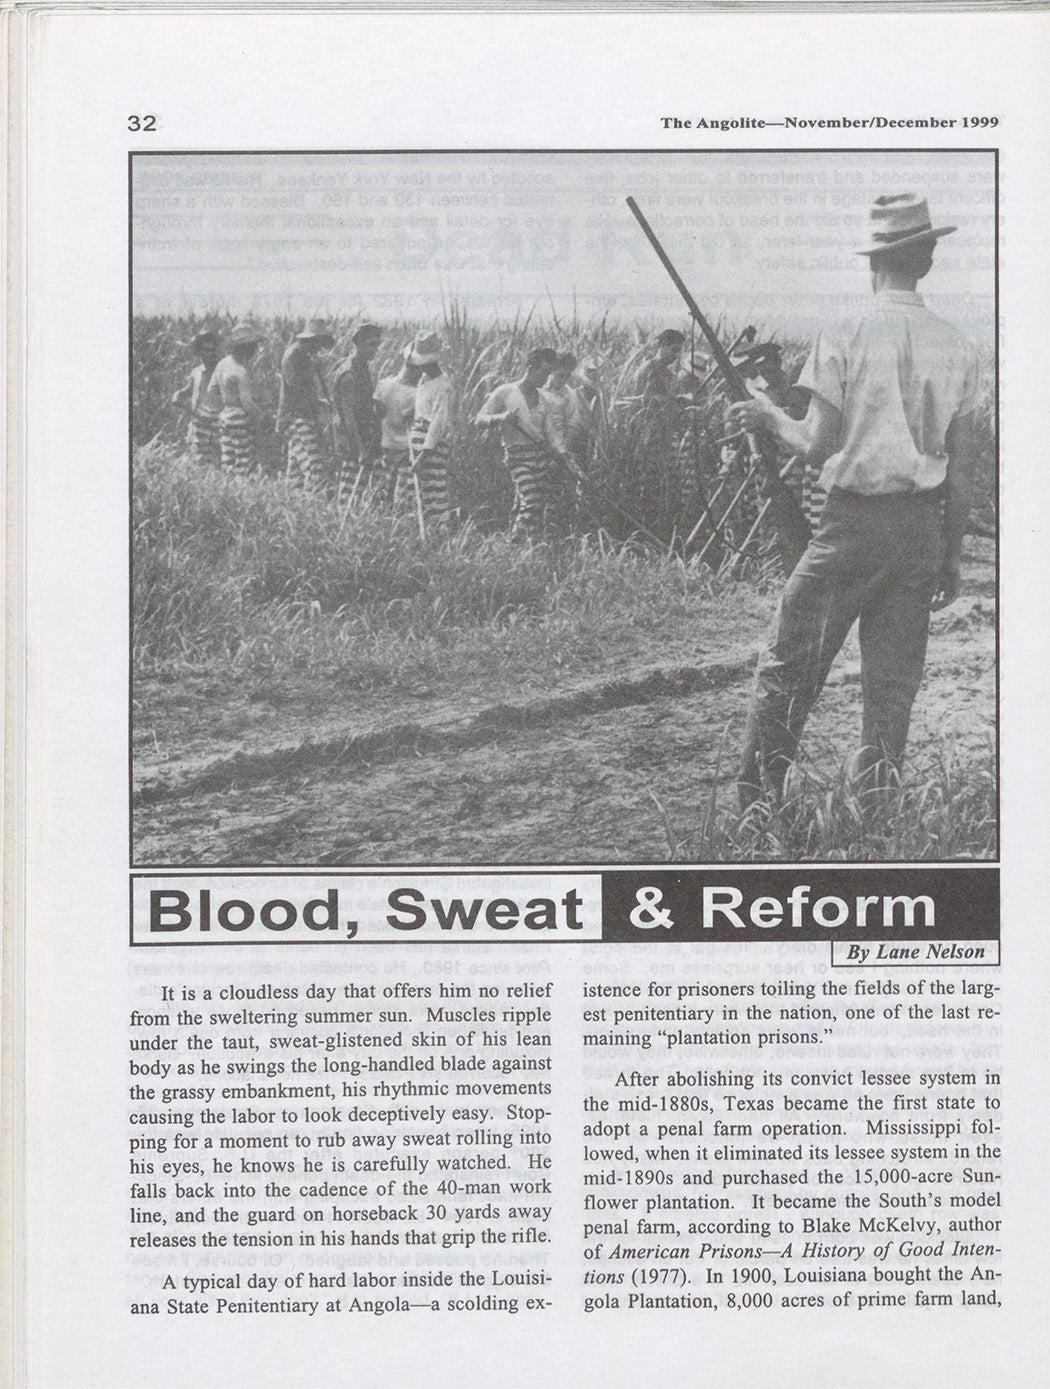 A page from The Angolite that features a photograph of a prison guard holding a shotgun while watching prisoners work in a field. The title of the article on the page is "Blood, Sweat & Reform."